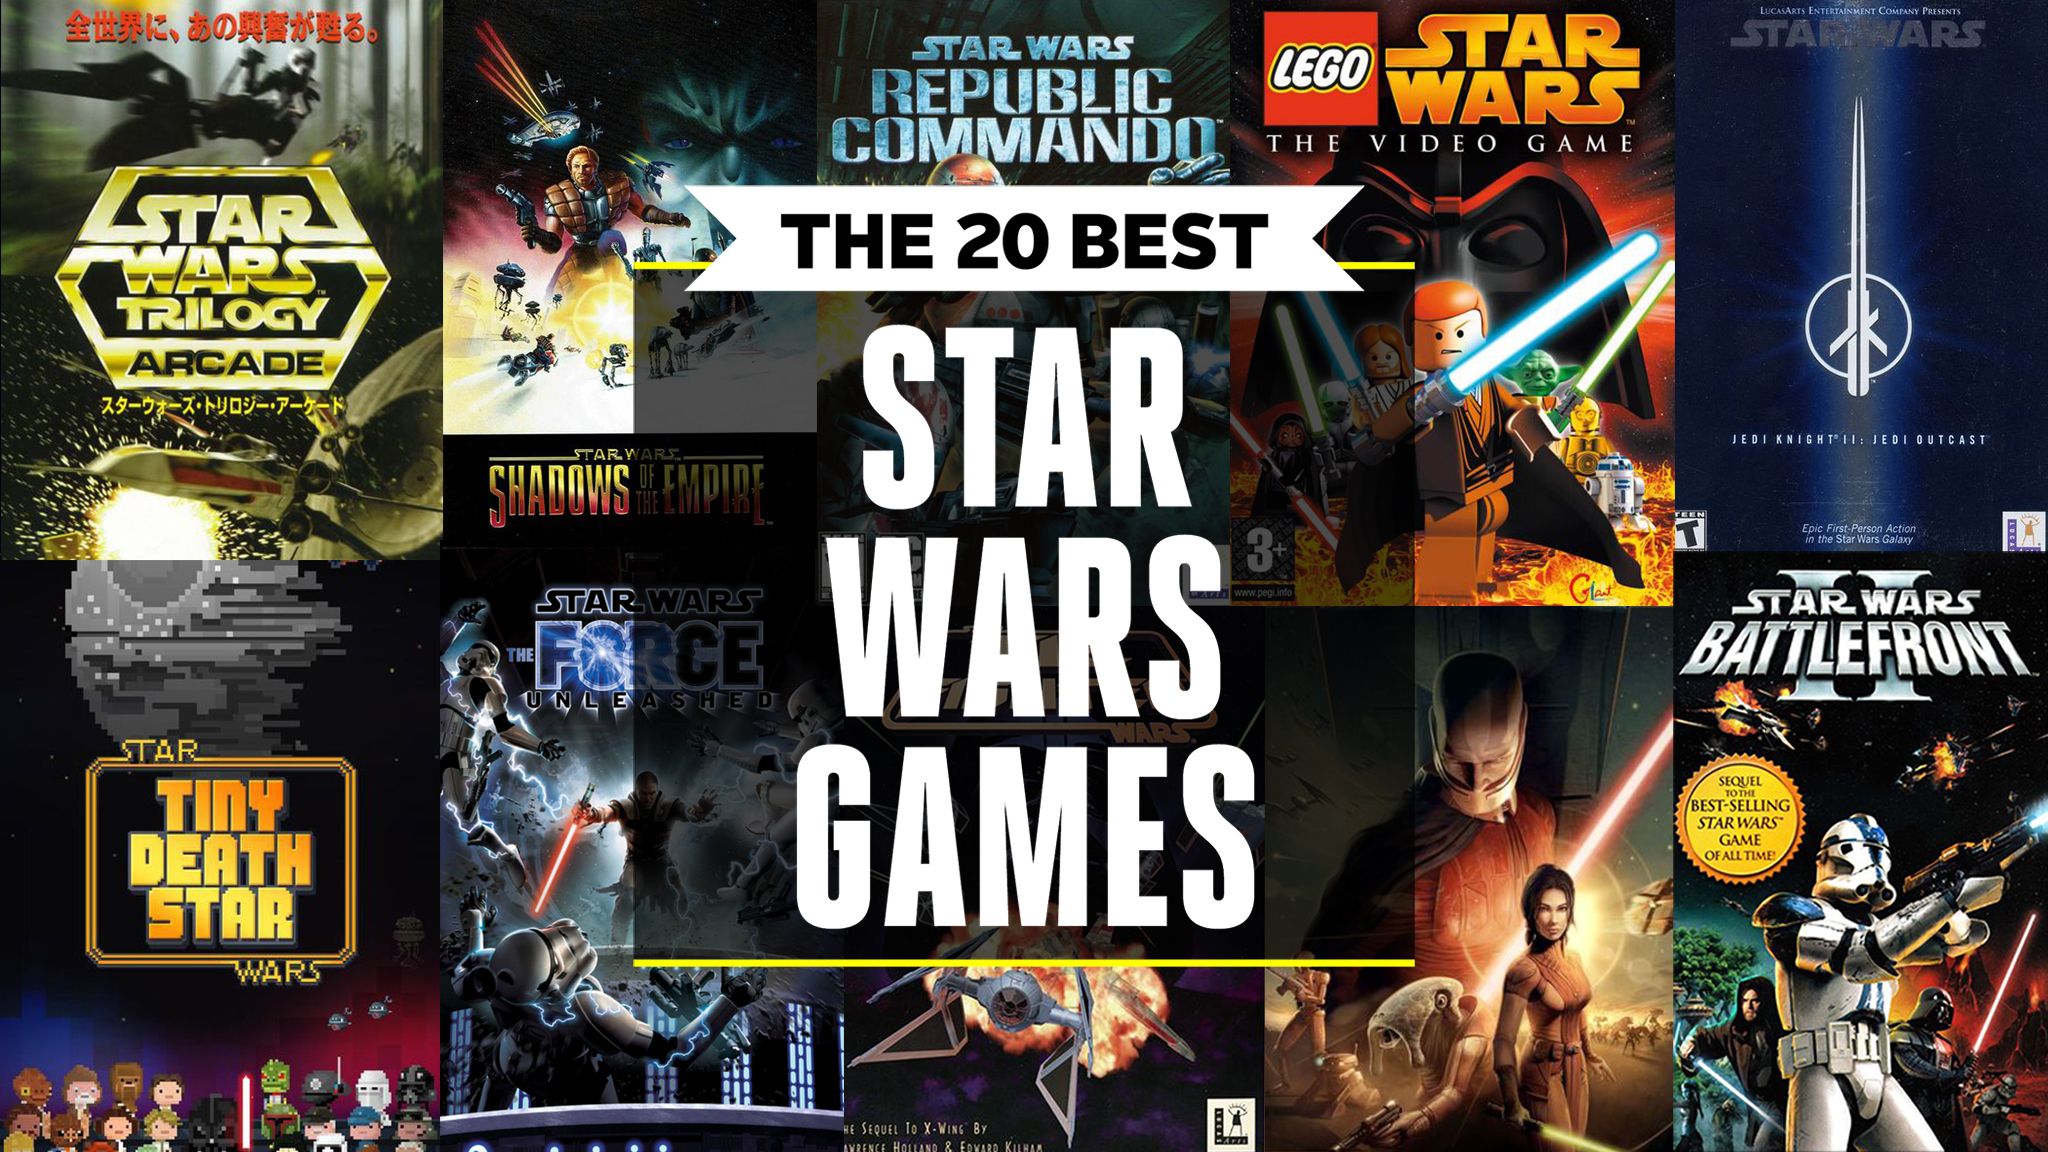 The 10 Best Star Wars Video Games of All Time - IGN